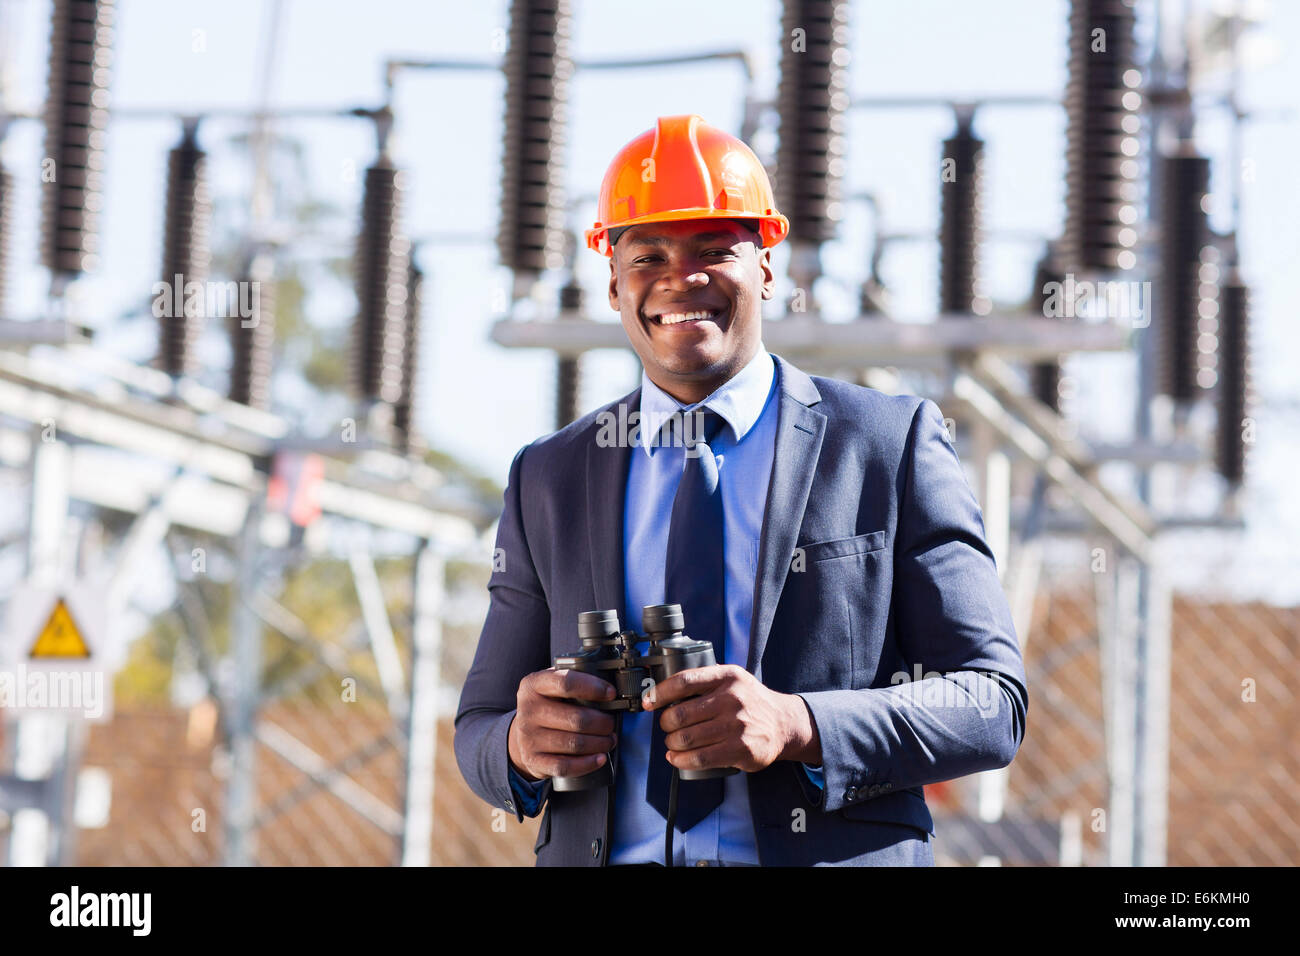 African industrial manager with binoculars in electricity power plant Stock Photo